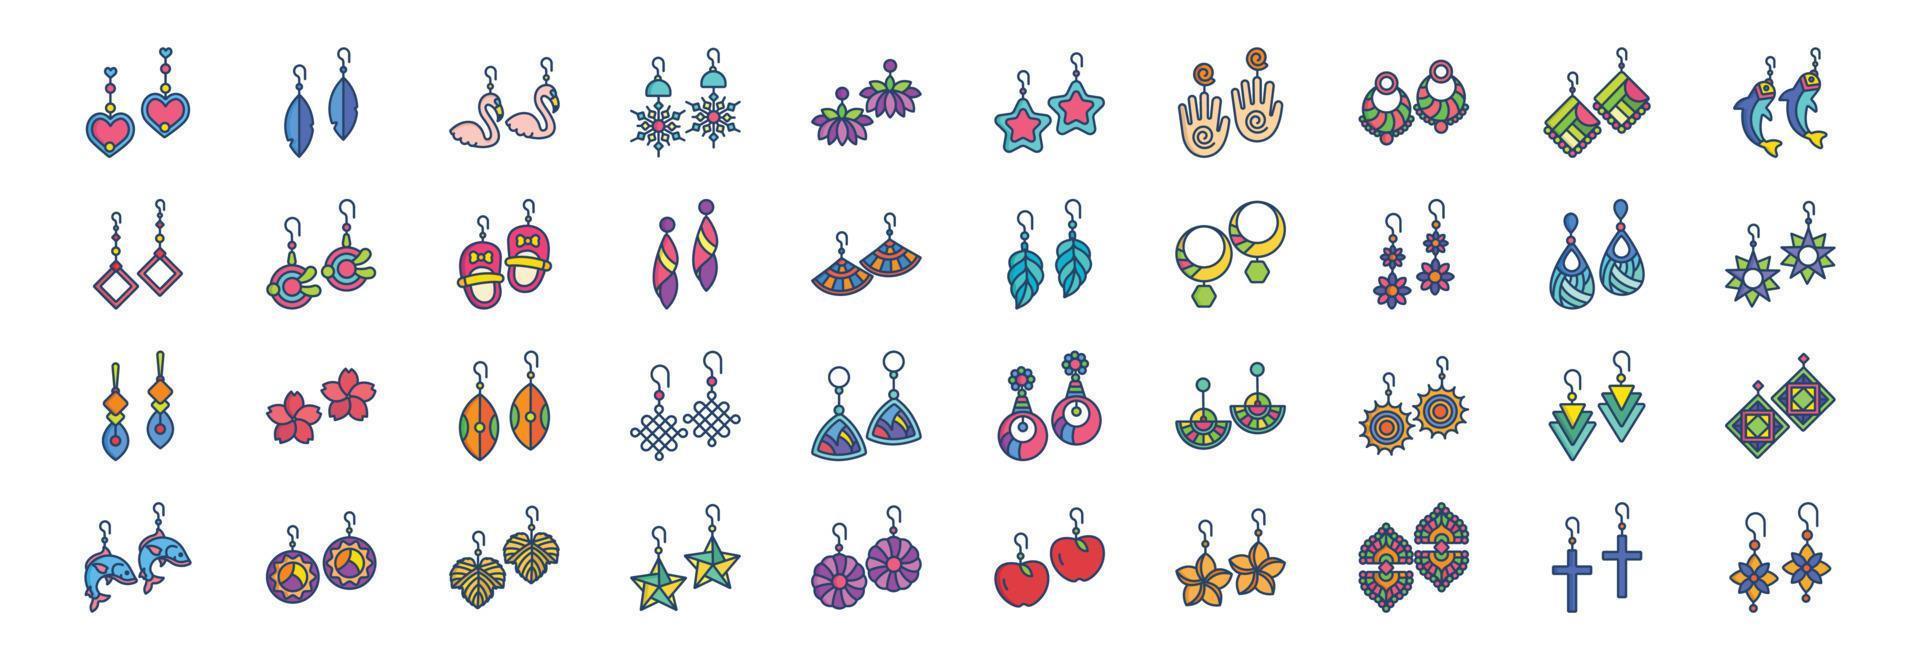 Collection of icons related to Earrings, including icons like Jewelry, gift and more. vector illustrations, Pixel Perfect set